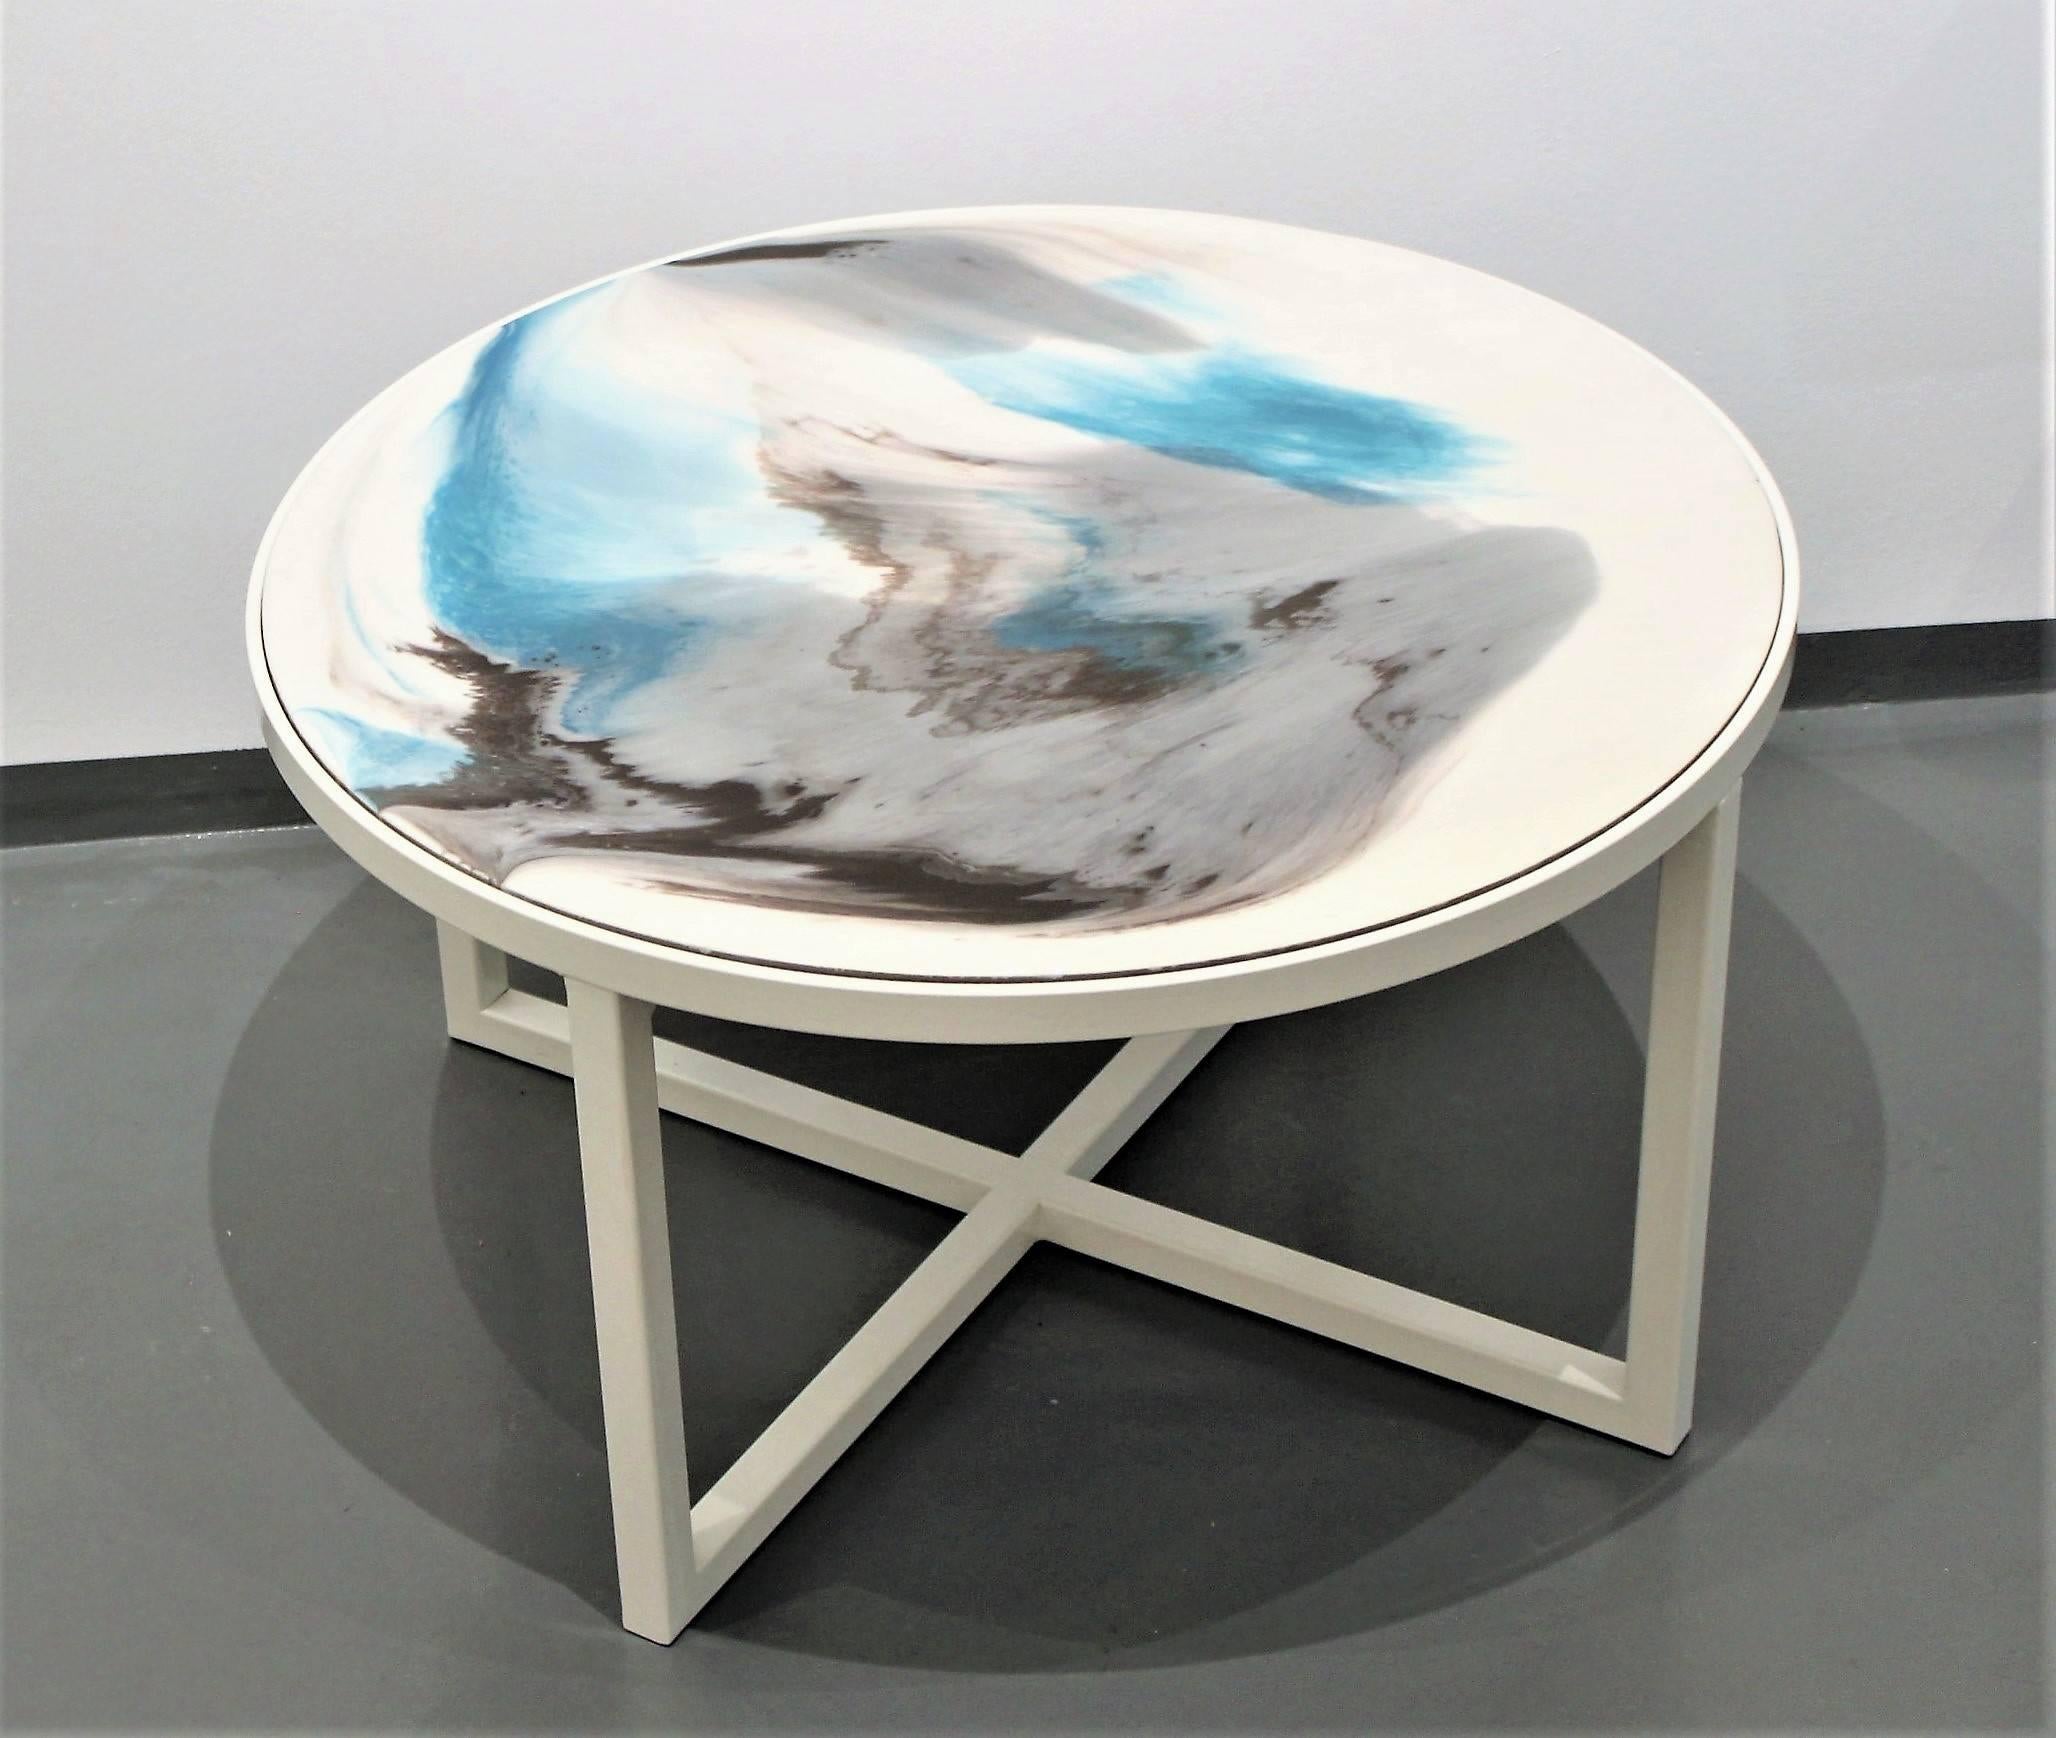 Unique handmade coffee table and part of Viscosity Art & Resin Gallery collection. The tabletop is made of hand-painted layers of colored resin on wood. A perfect color-contrasting combination of teal and dark brown tones, floating on off-white